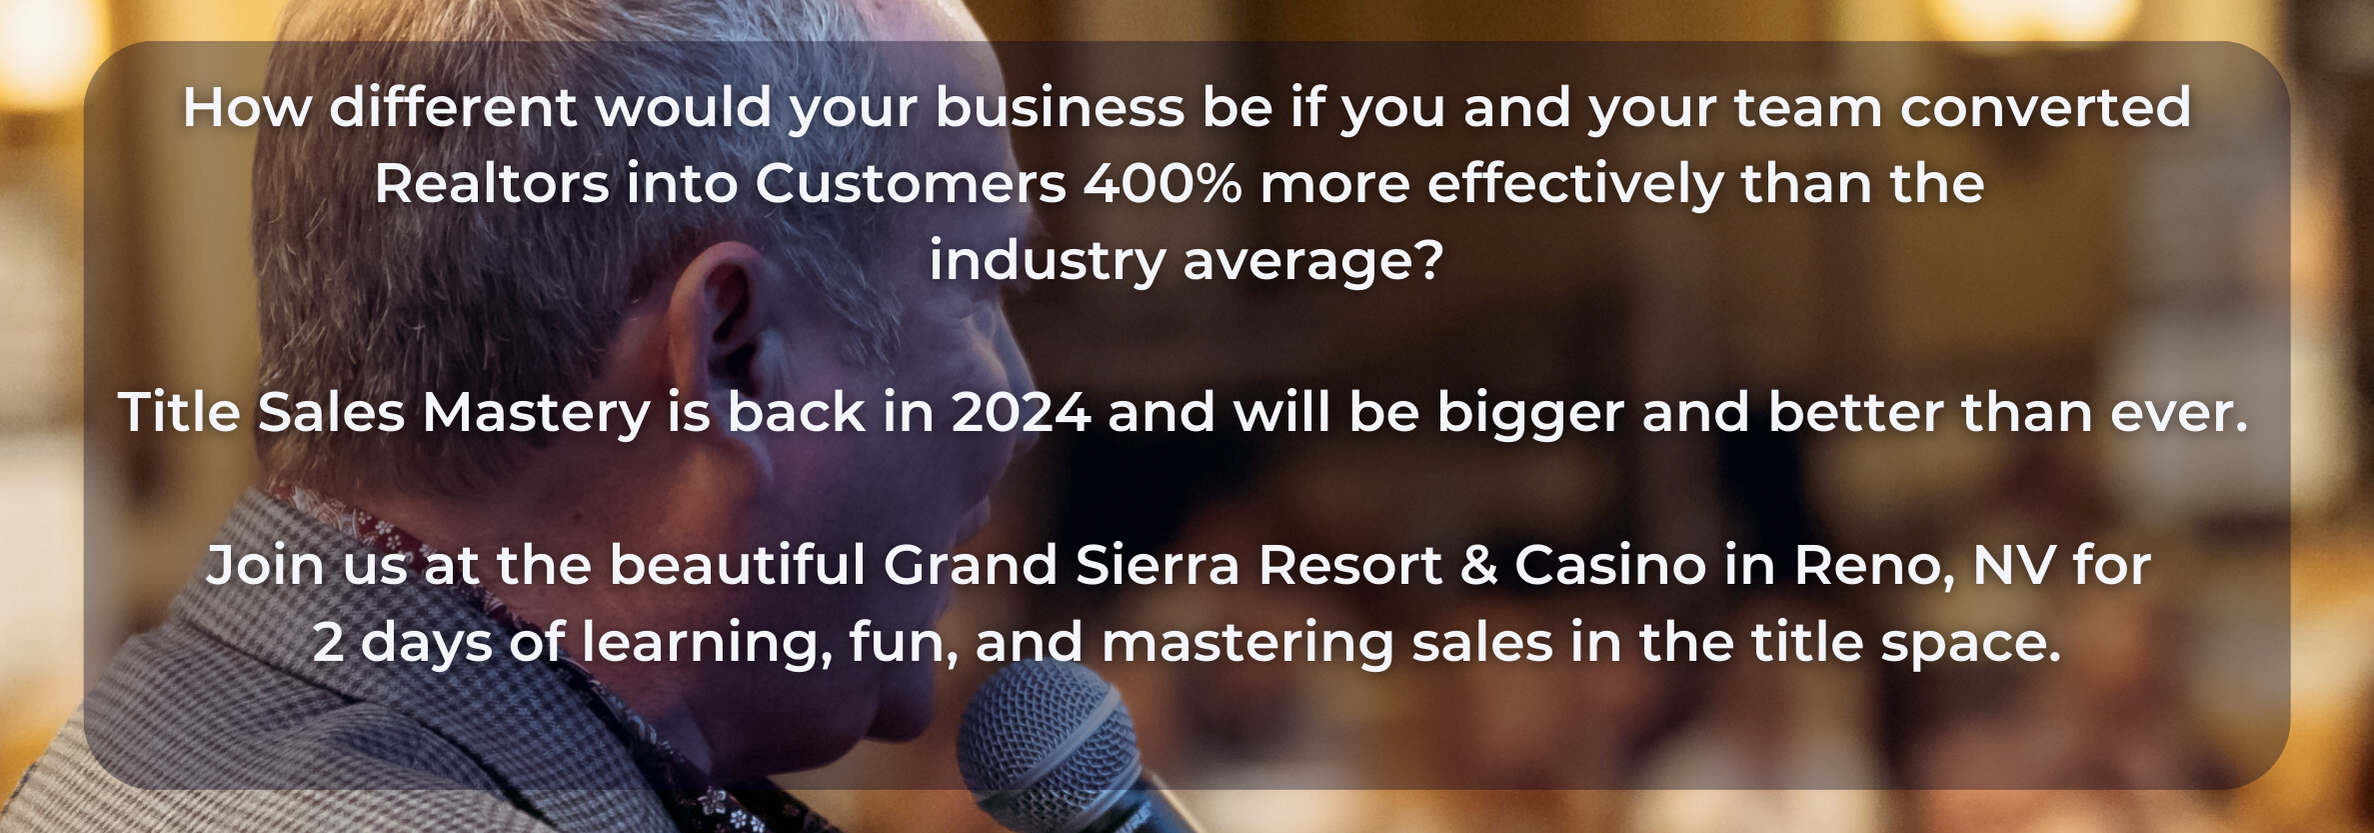 How different would your business be if you and your team converted Realtors into Customers 400% more effectively than the industry average? Title Sales Mastery is back in 2024 and will be bigger and better than ever. Join us at the beautiful Grand Sierra Resort & Casino in Reno, NV for 2 days of learning, fun, and mastering sales in the title space.